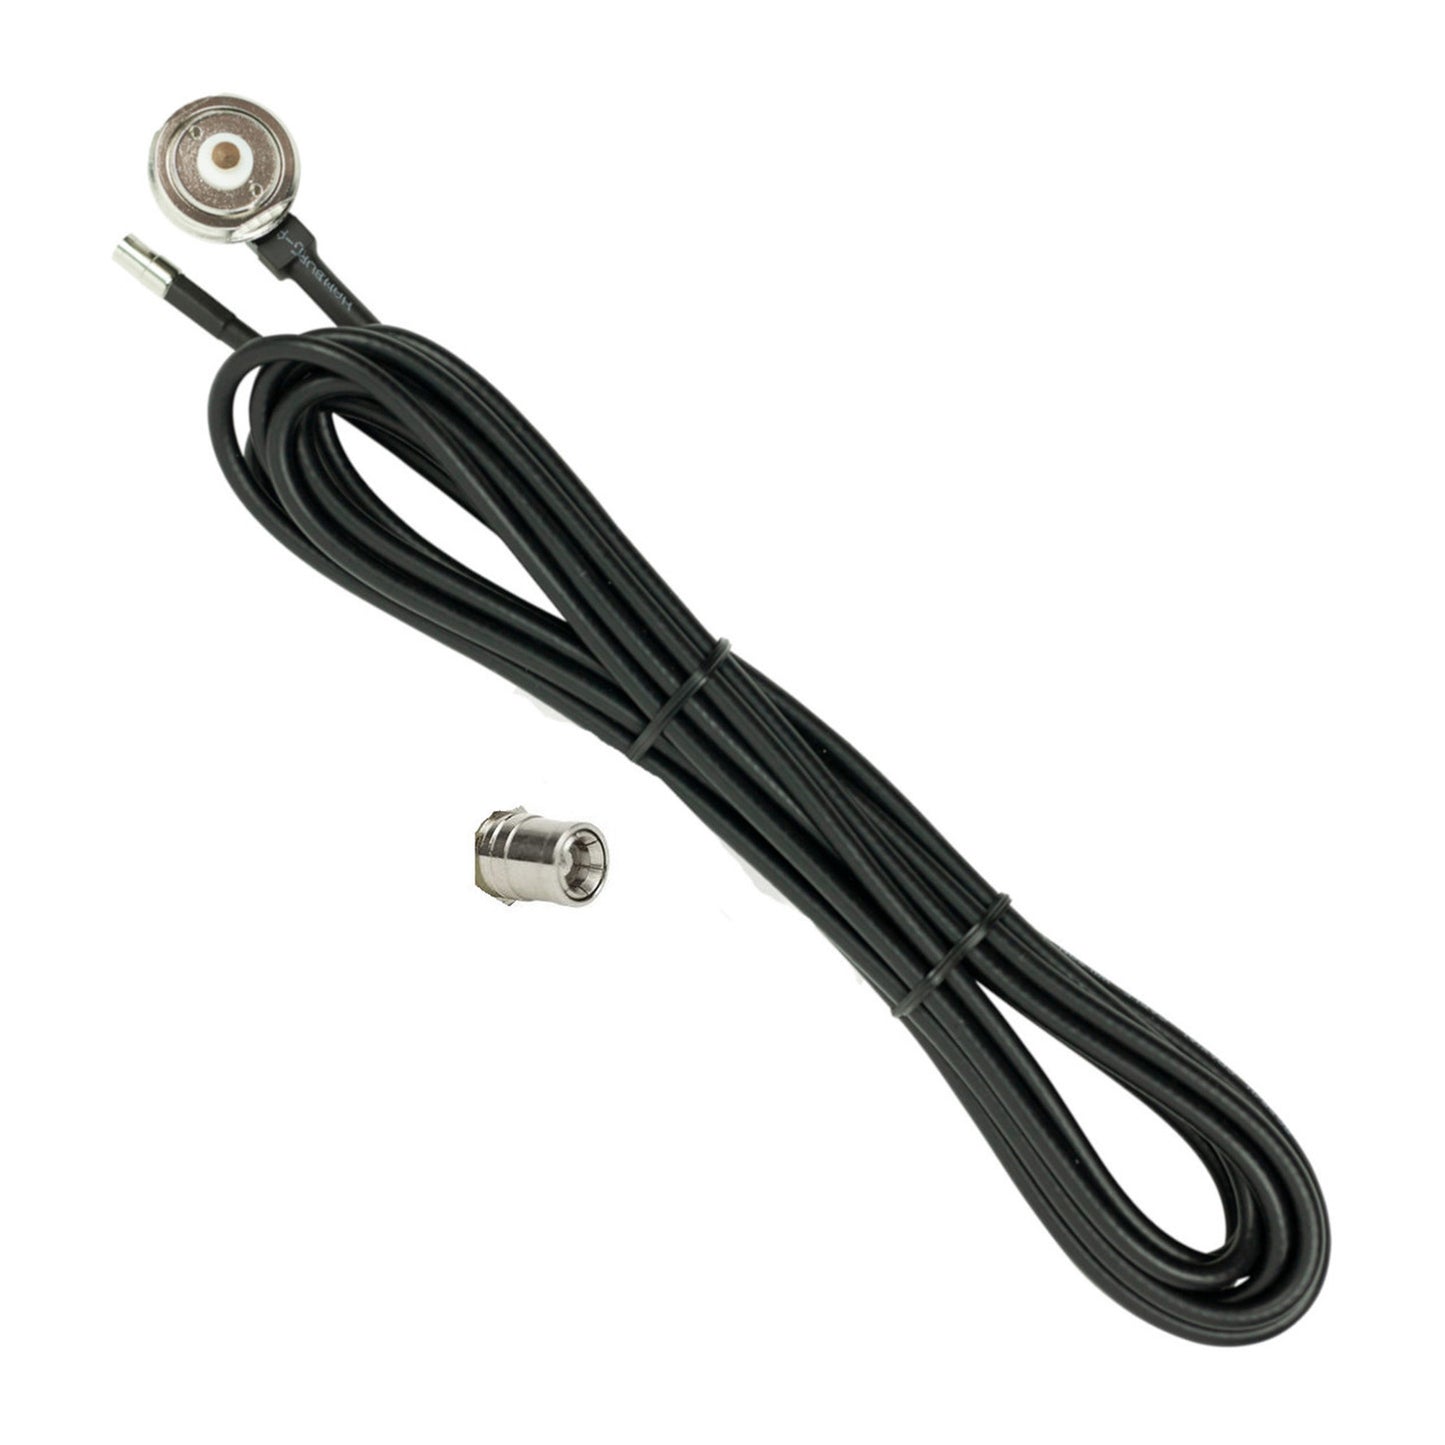 weBoost Black 3/4" NMO w/ 14 ft. RG58 Cable and SMB Plug (Female) Connector - 15-06877